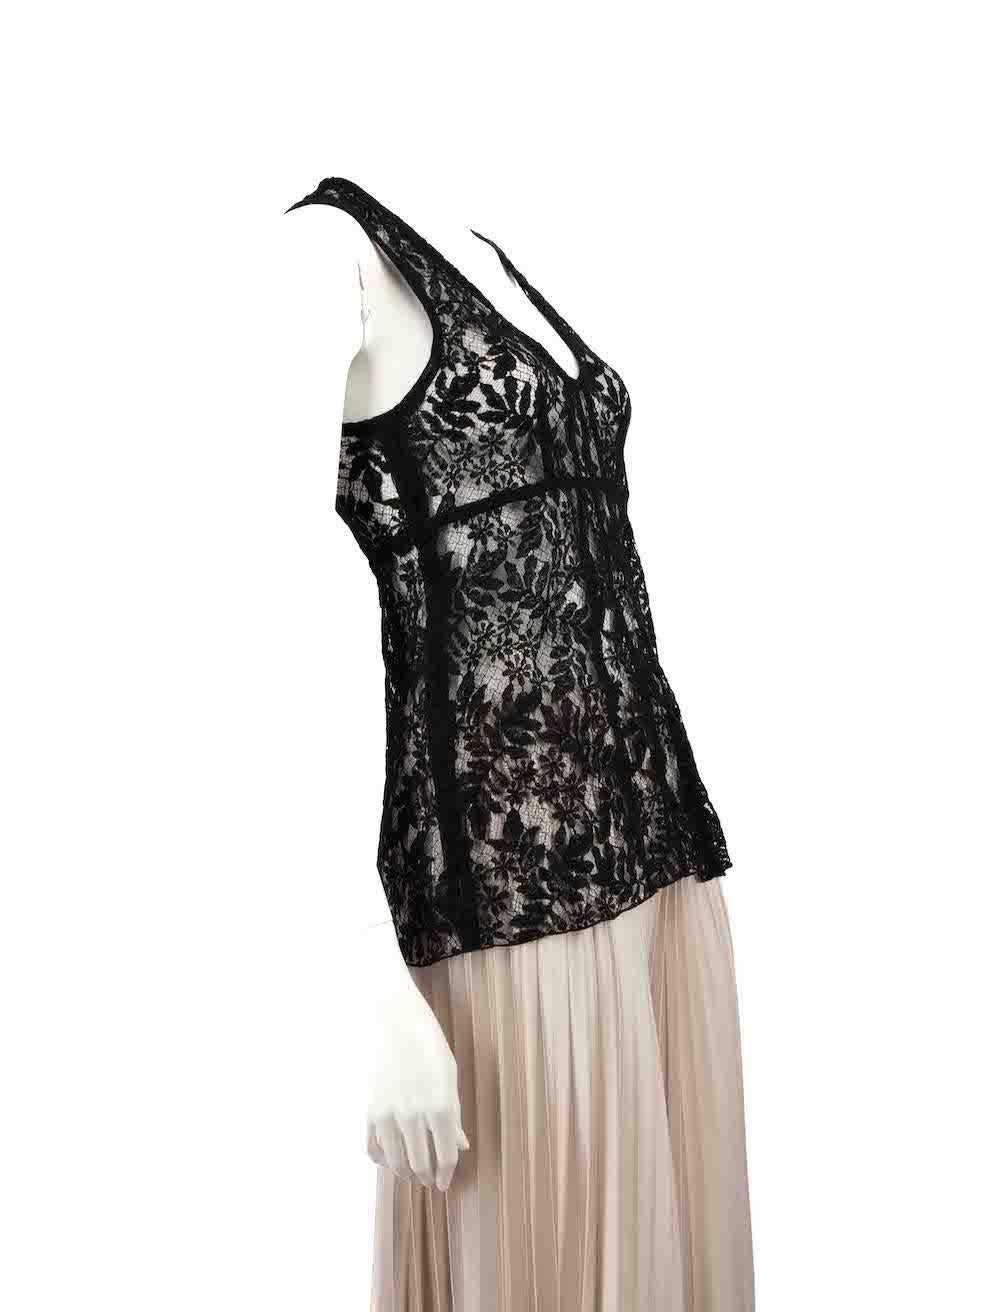 CONDITION is Very good. Hardly any visible wear to top is evident on this used Louis Vuitton designer resale item.
 
 
 
 Details
 
 
 Black
 
 Lace
 
 Tank top
 
 Back zip fastening
 
 See through
 
 
 
 
 
 Made in France
 
 
 
 Composition
 
 NO